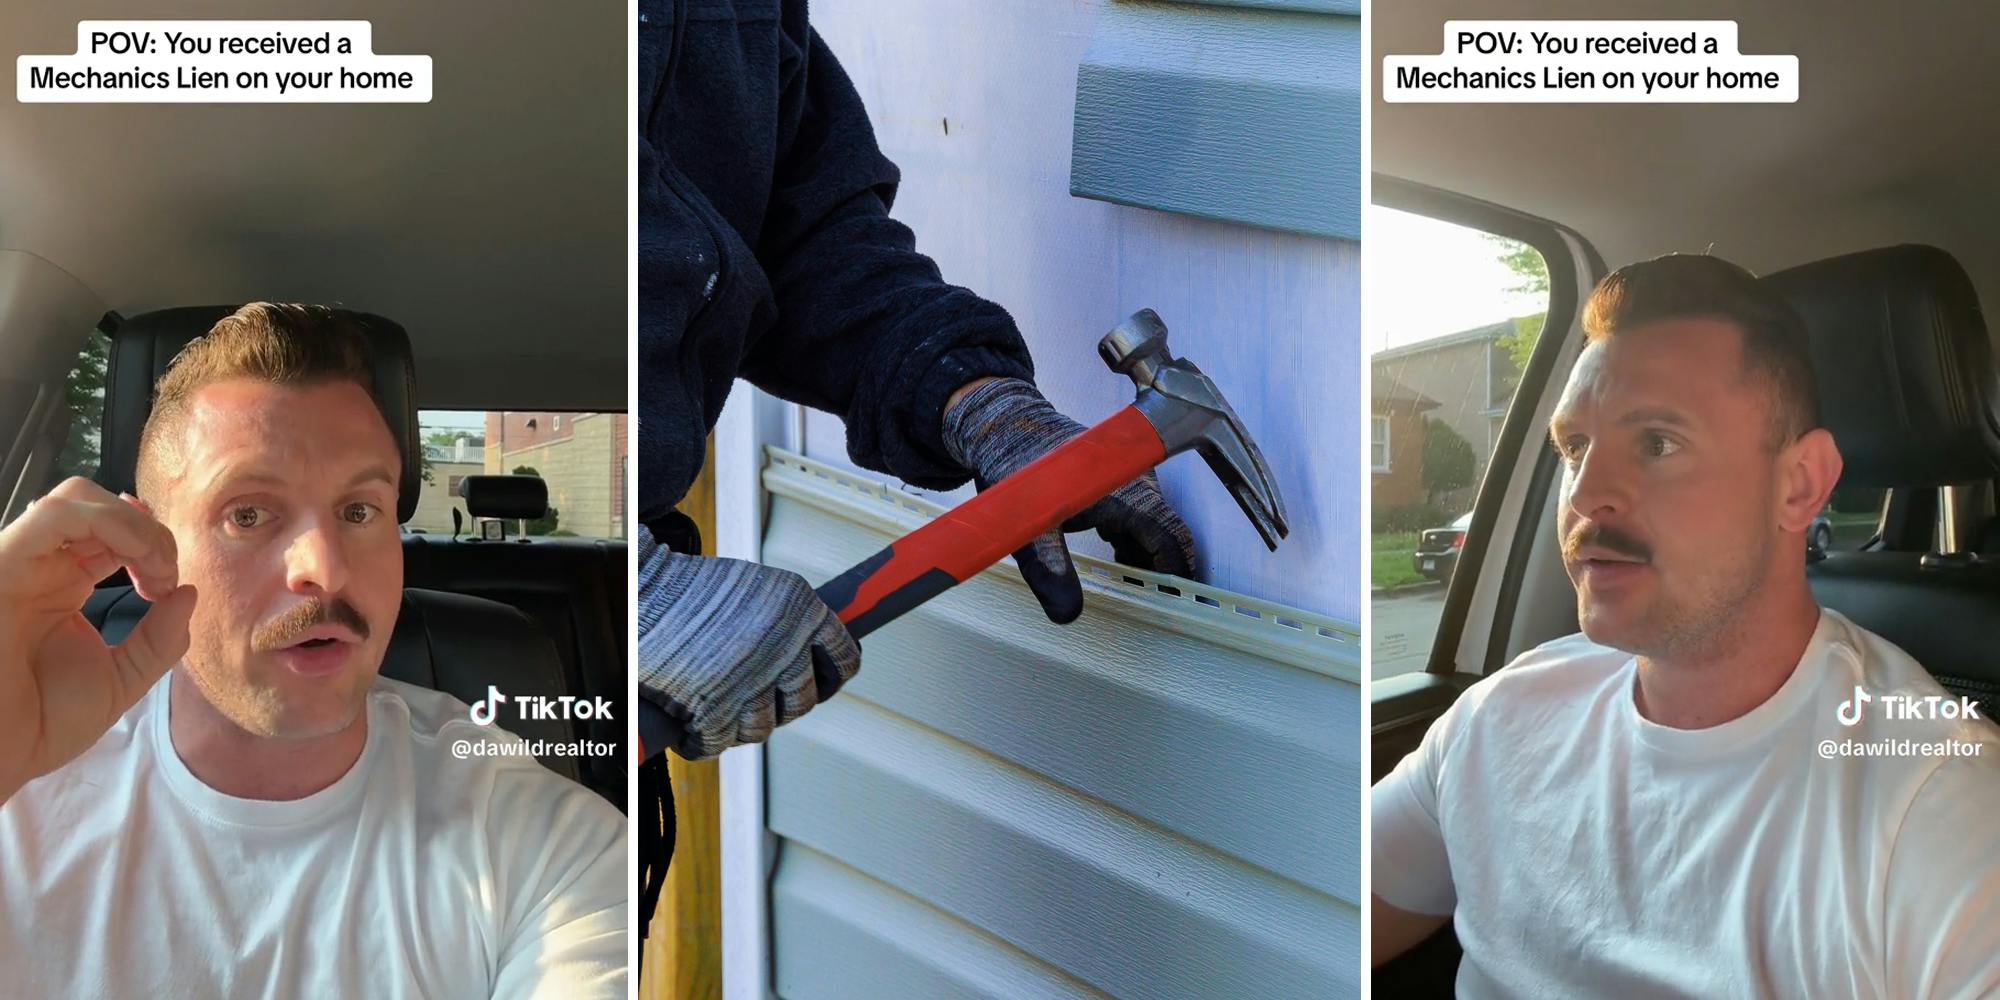 man in car with caption "POV: you received a Mechanics Lien on your home" (l&r) person working on siding (c)